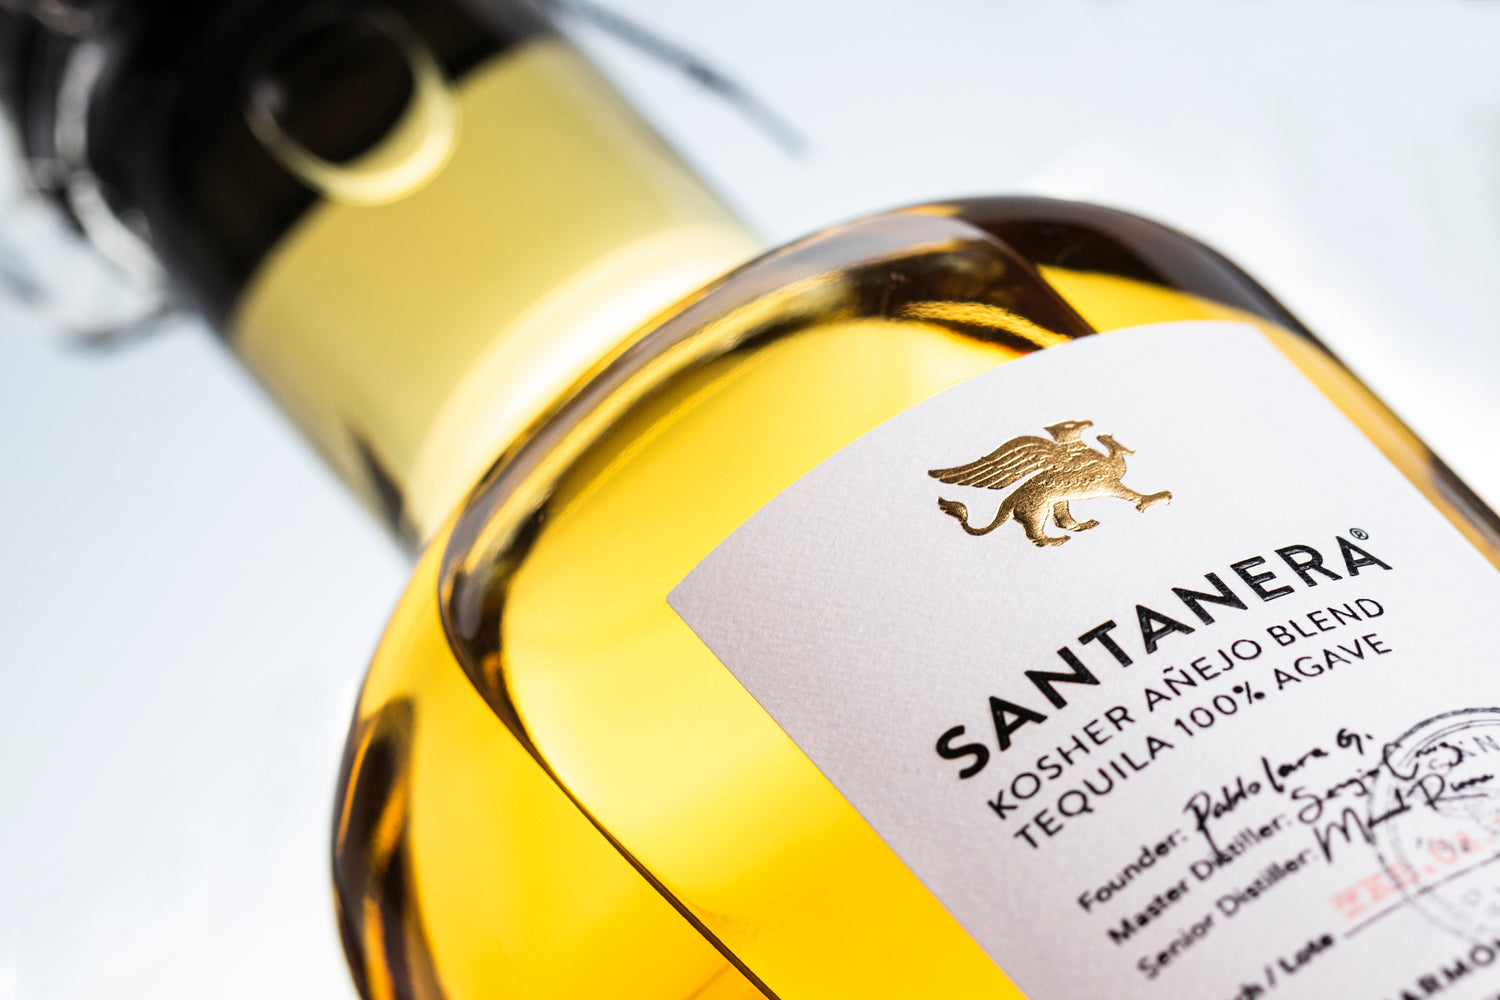 SANTANERA TEQUILA | ICONIC BEVERAGES